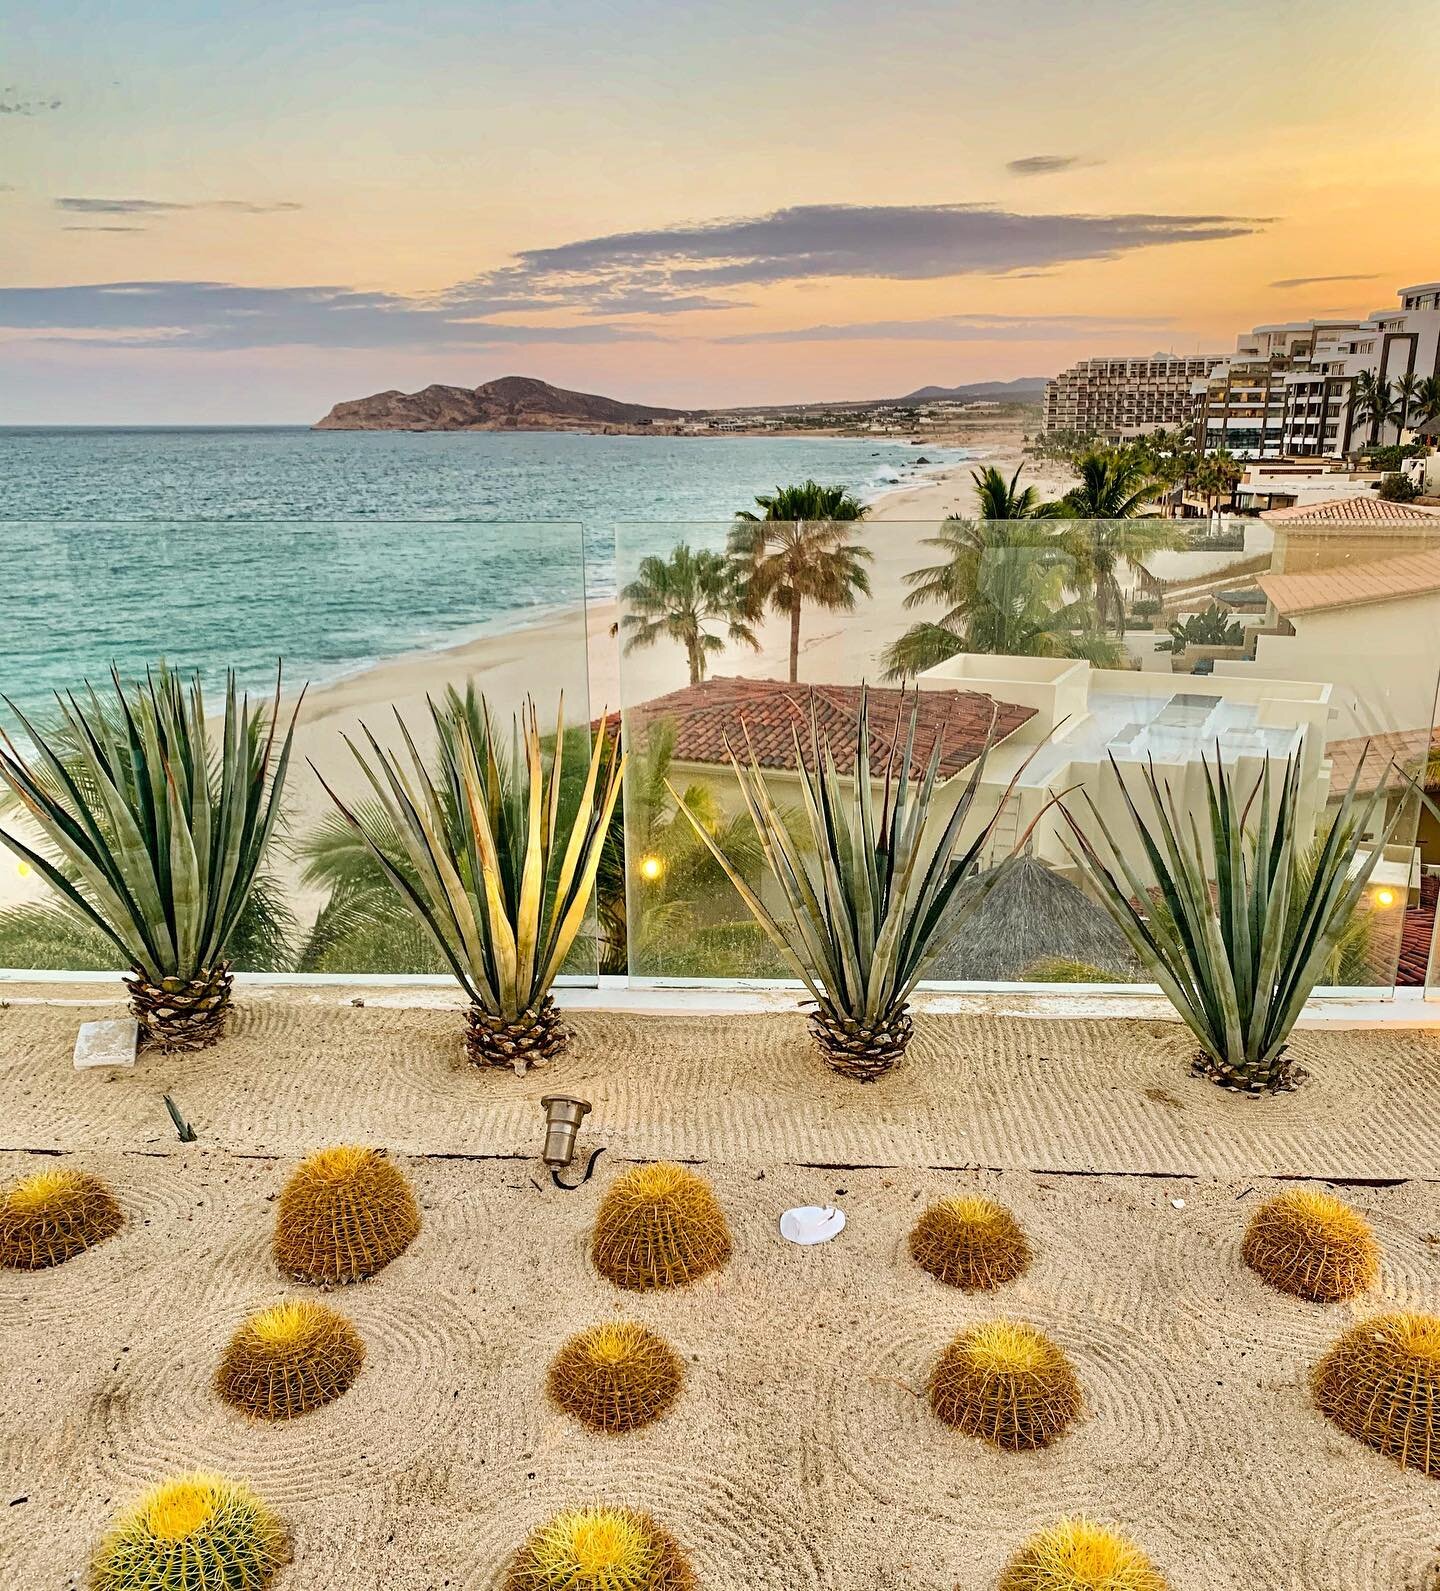 Never-ending beautiful sights to see ✨

✨What is it about Los Cabos that you love the most? Comment below!